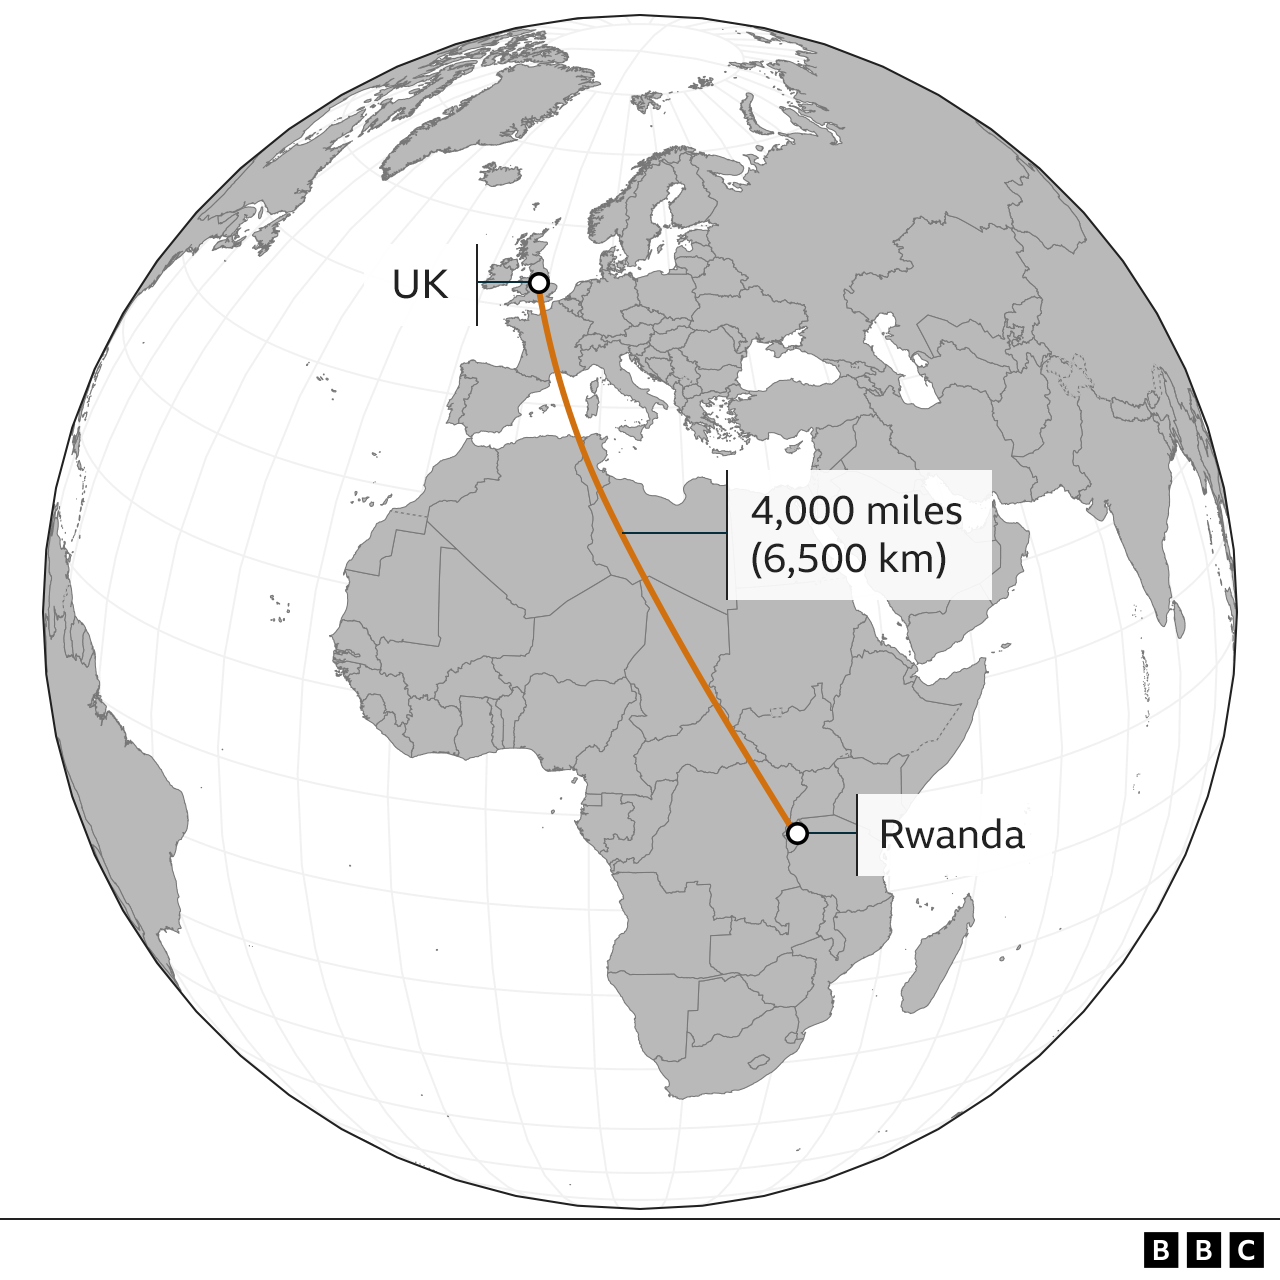 Map showing the distance from the UK to Rwanda.